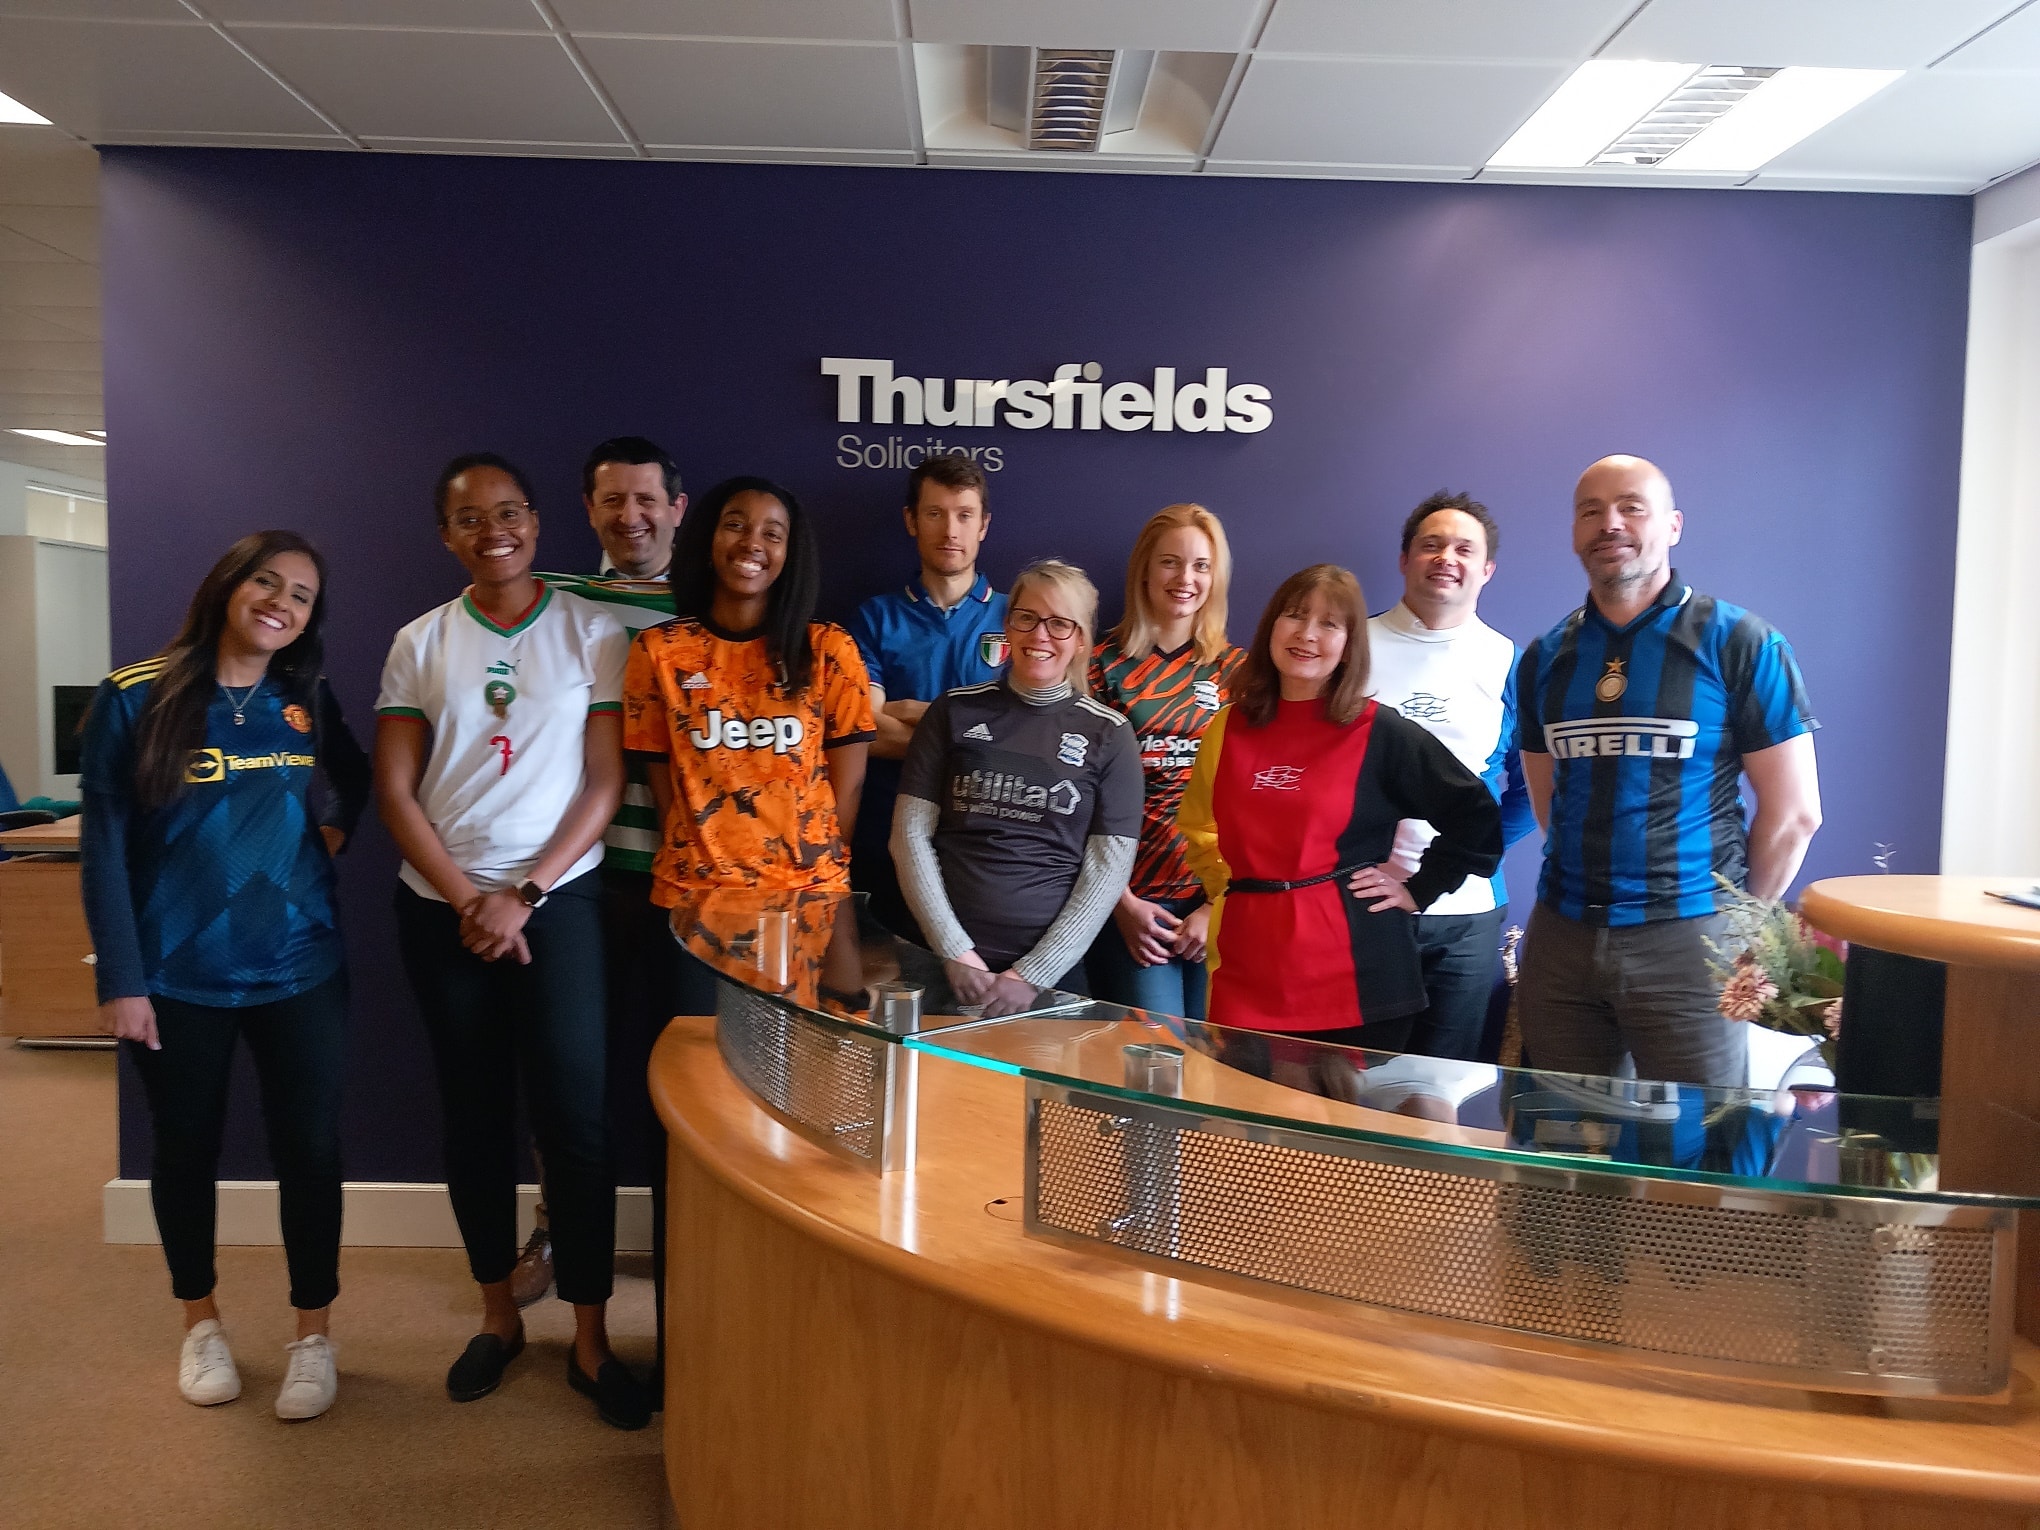 Football Shirt Day in the Office